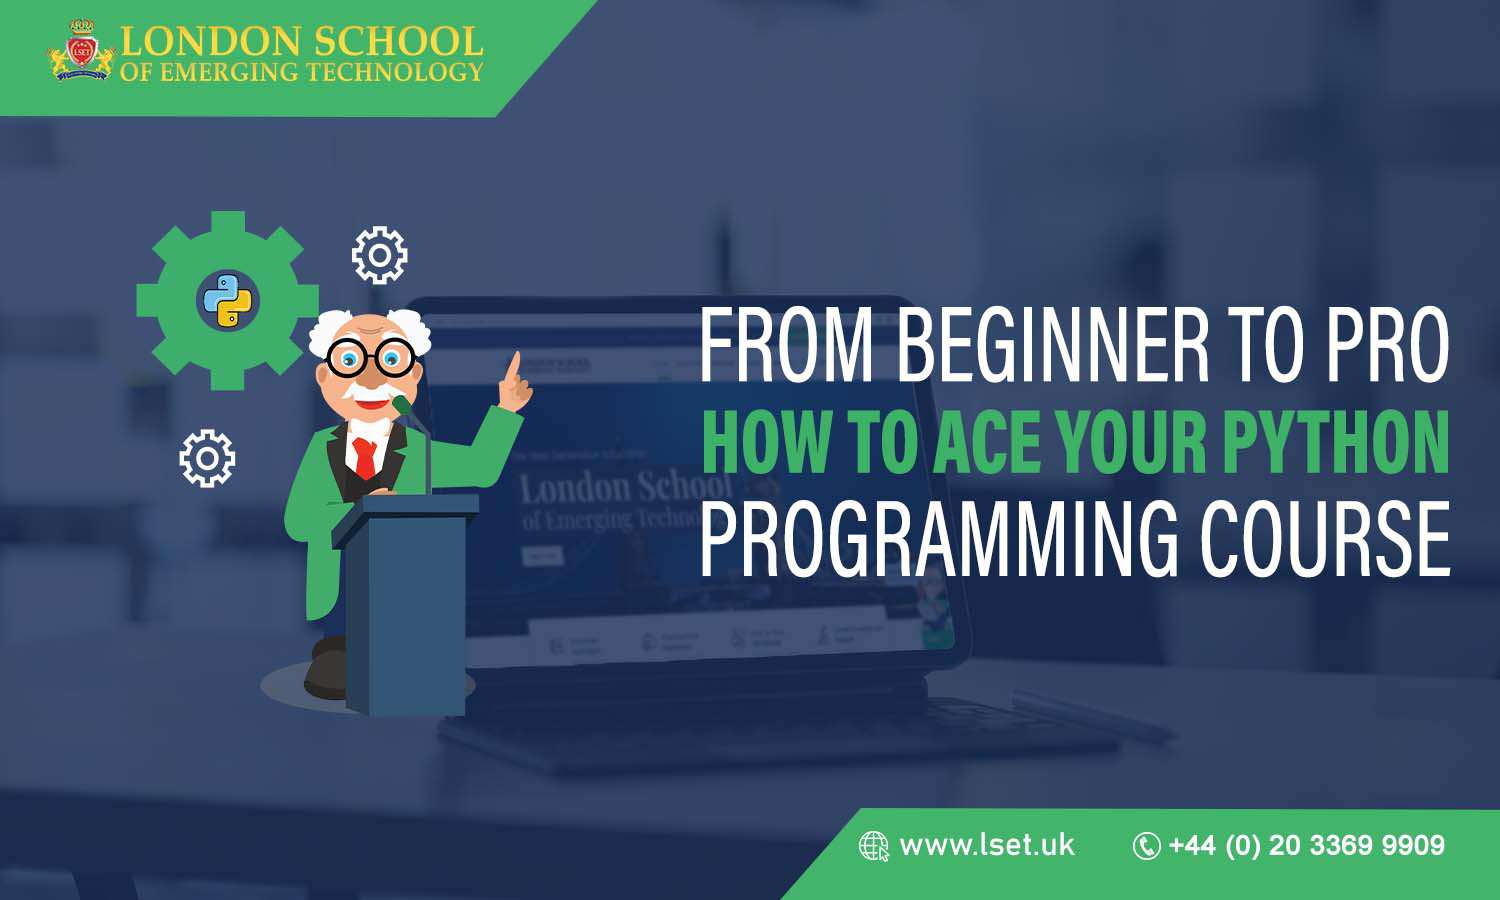 From Beginner to Pro How to Ace Your Python Programming Course